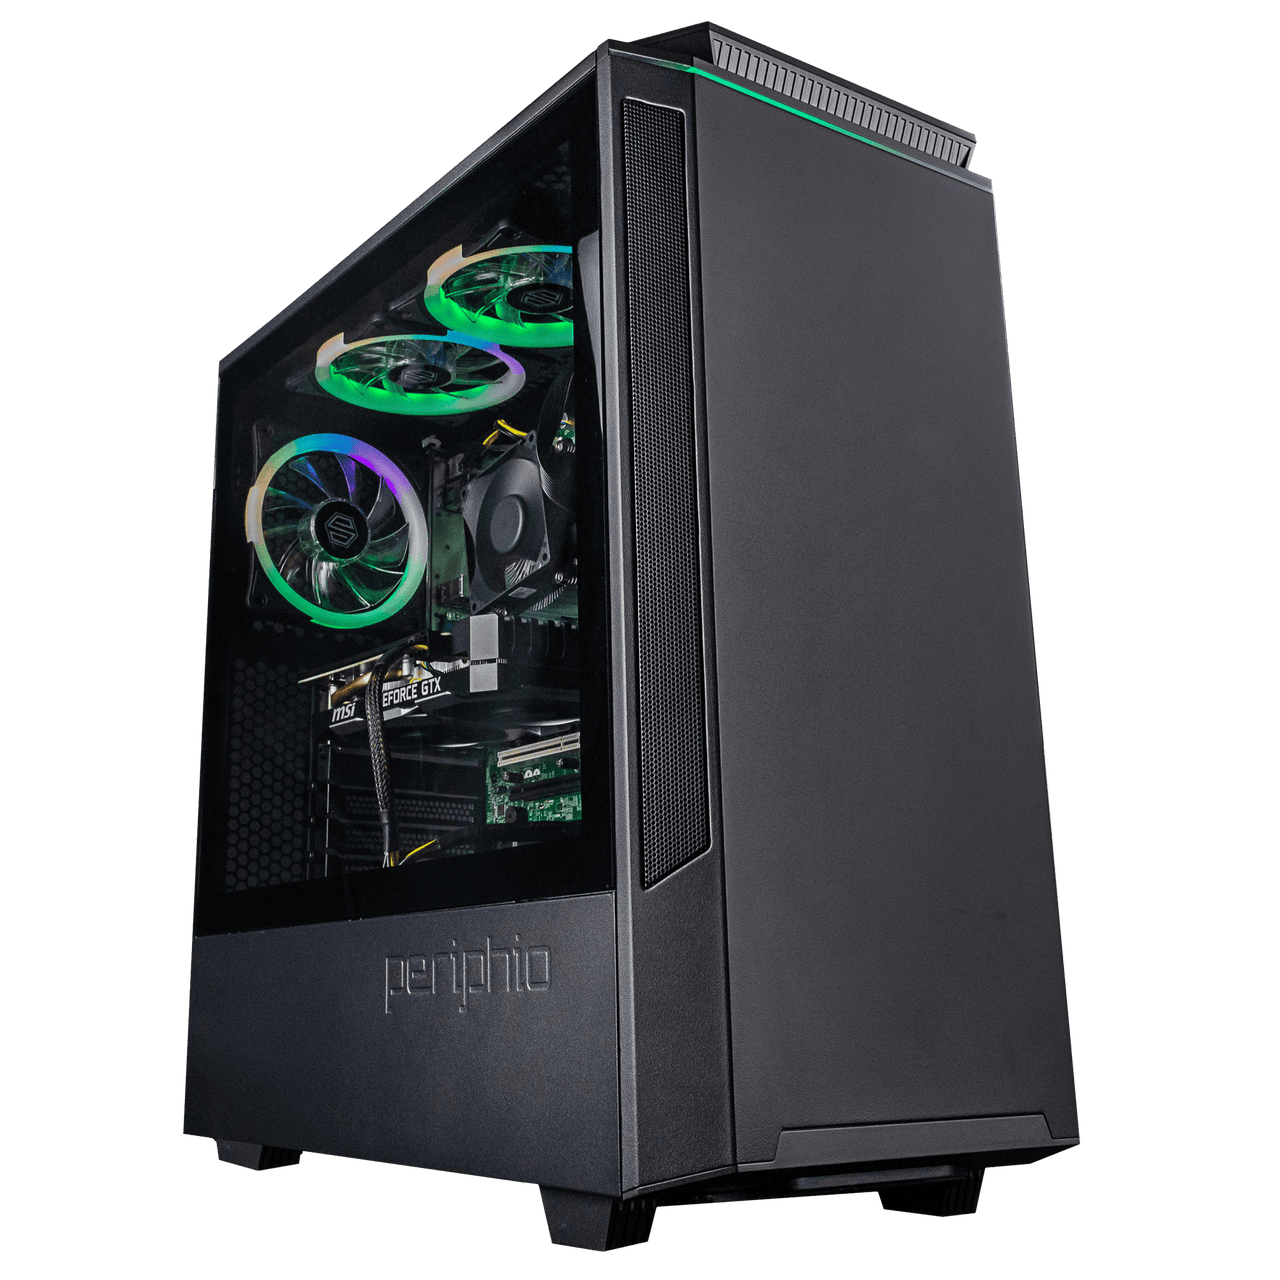 What is a Good Gaming PC for League of Legends? – Apex Gaming PCs